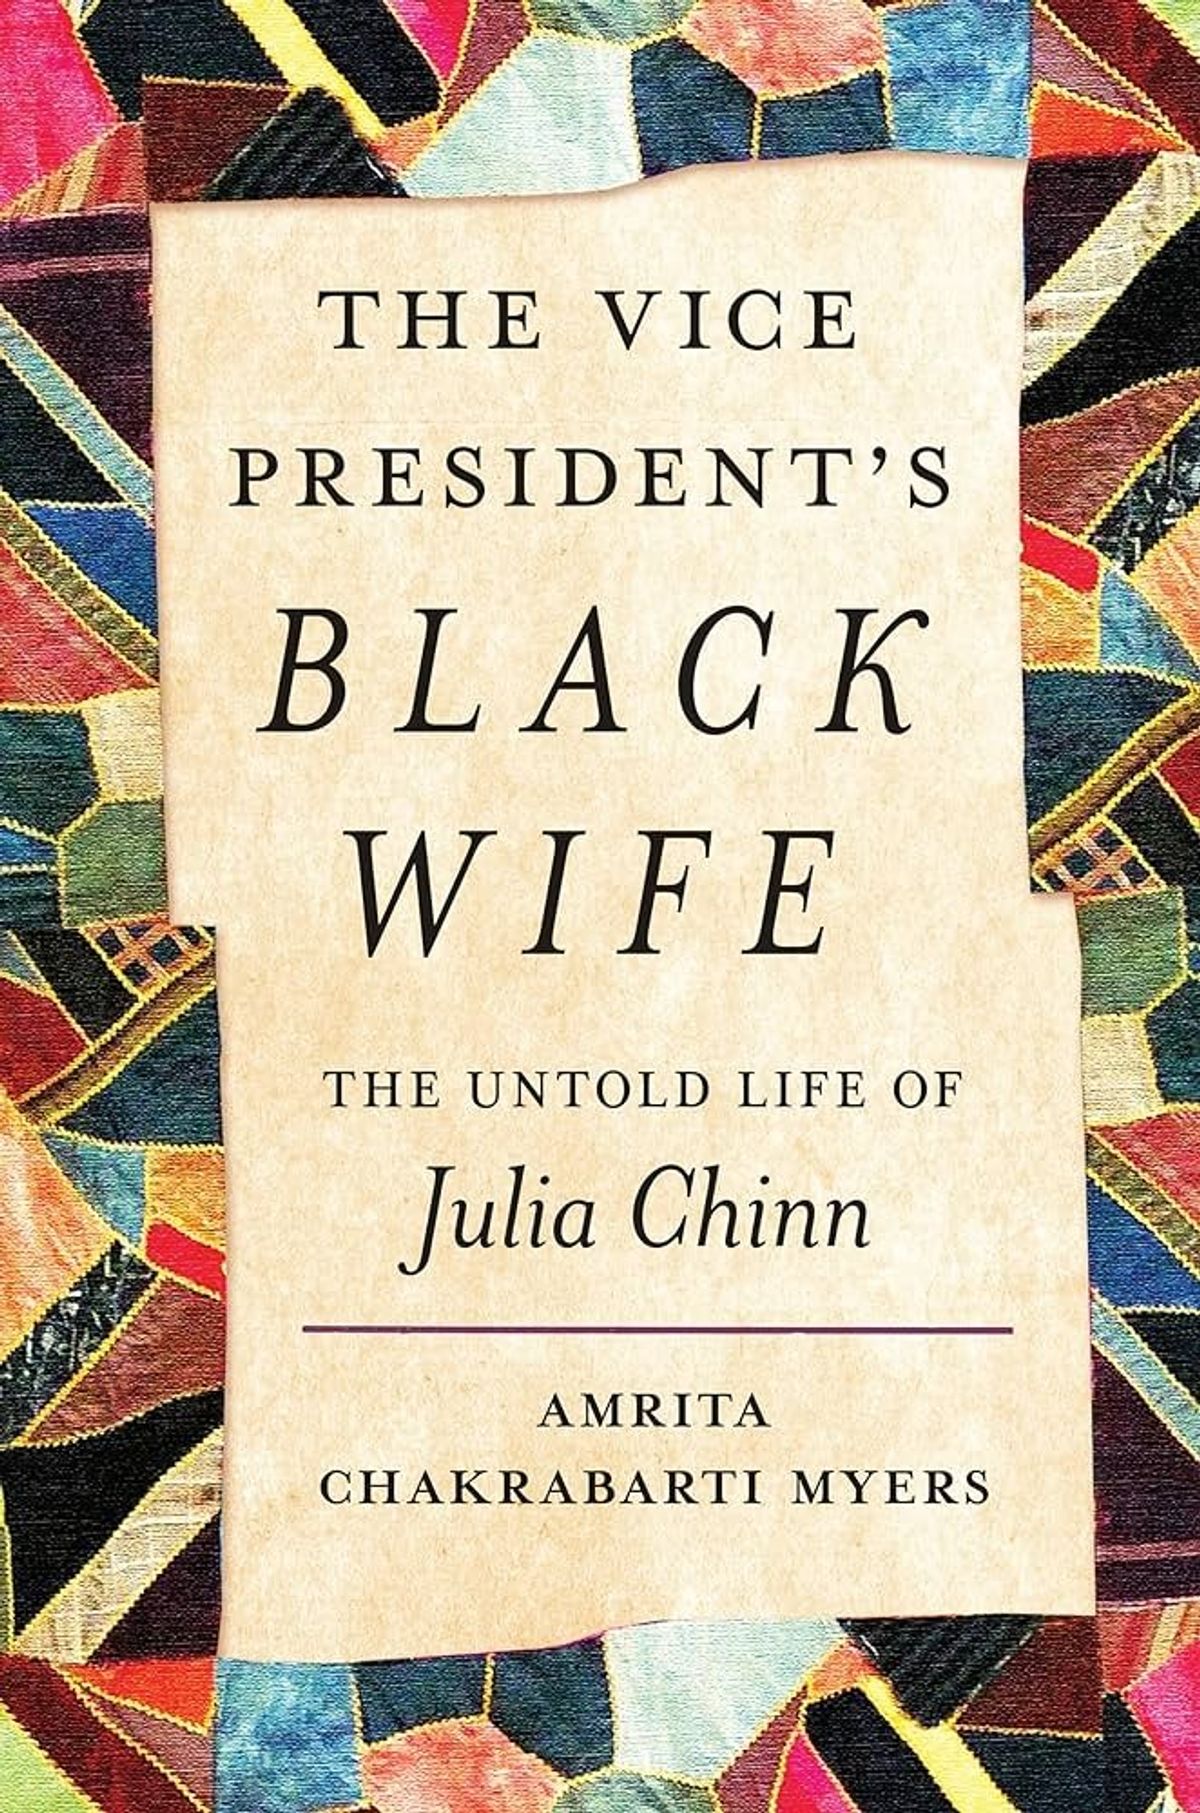 Never a secret: The Black wife of a vice president